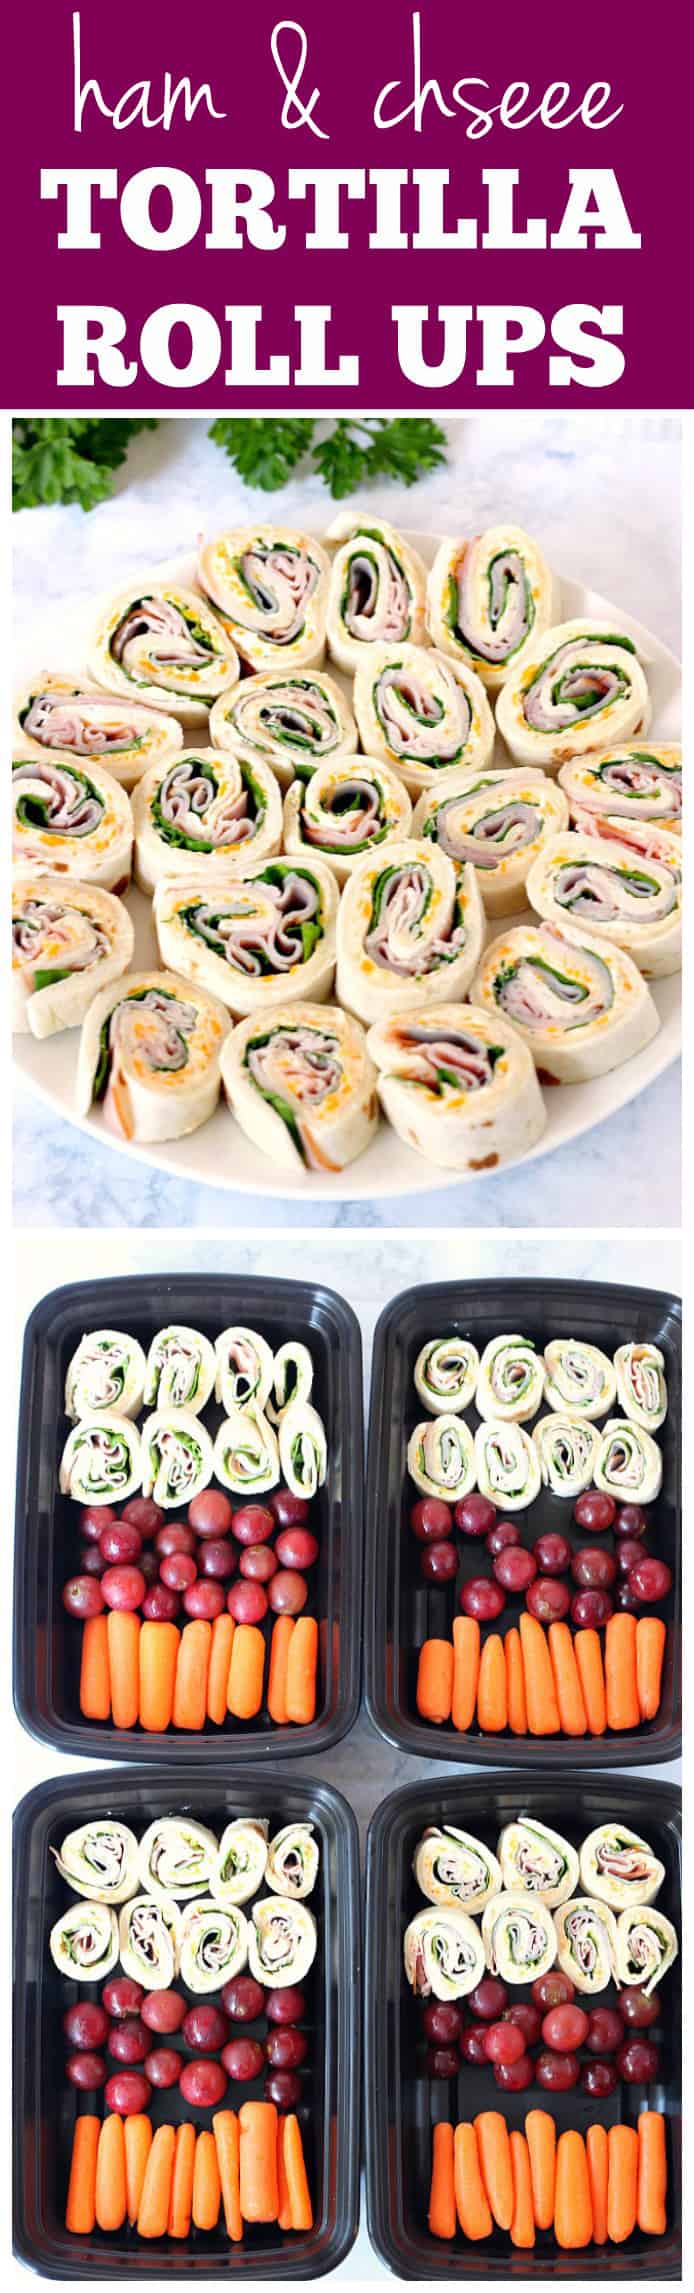 Ham and Cheese Tortilla Roll Ups Recipe - quick and easy lunch idea or snack for road trips! Creamy cheddar filling, layered with spinach and ham slices, paired with fruit and vegetables is great made ahead as well.